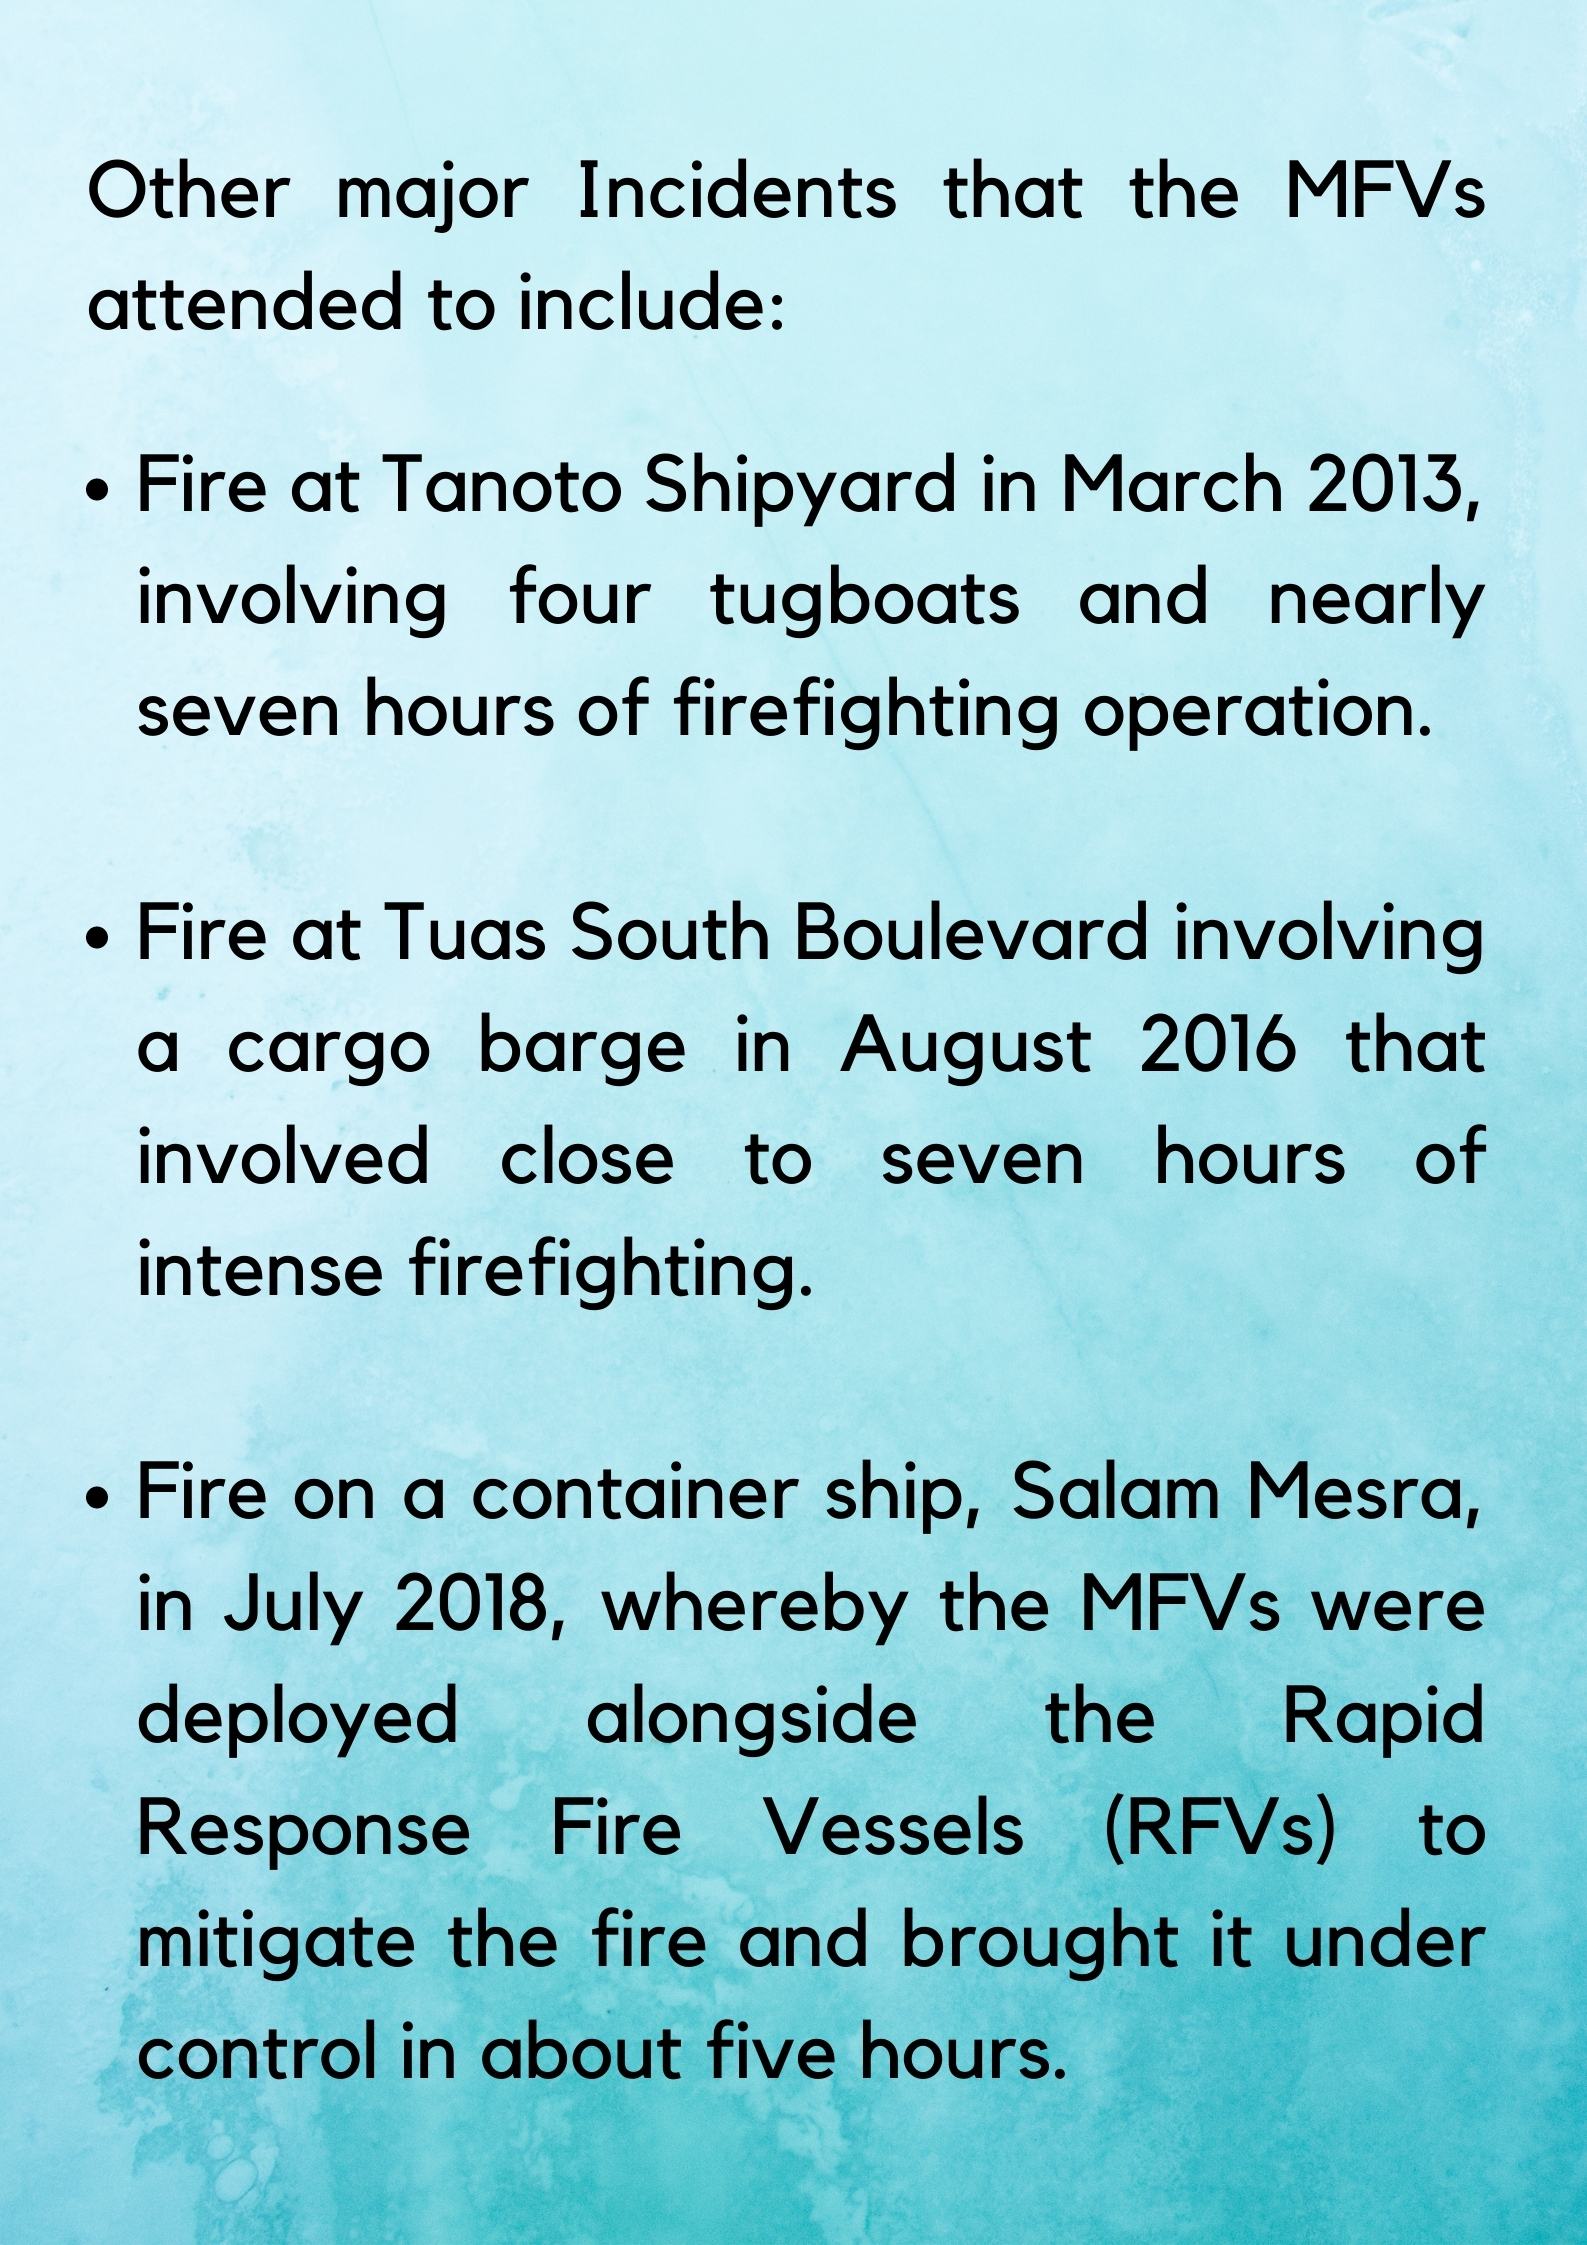 Major Incidents that the MFVs attended to